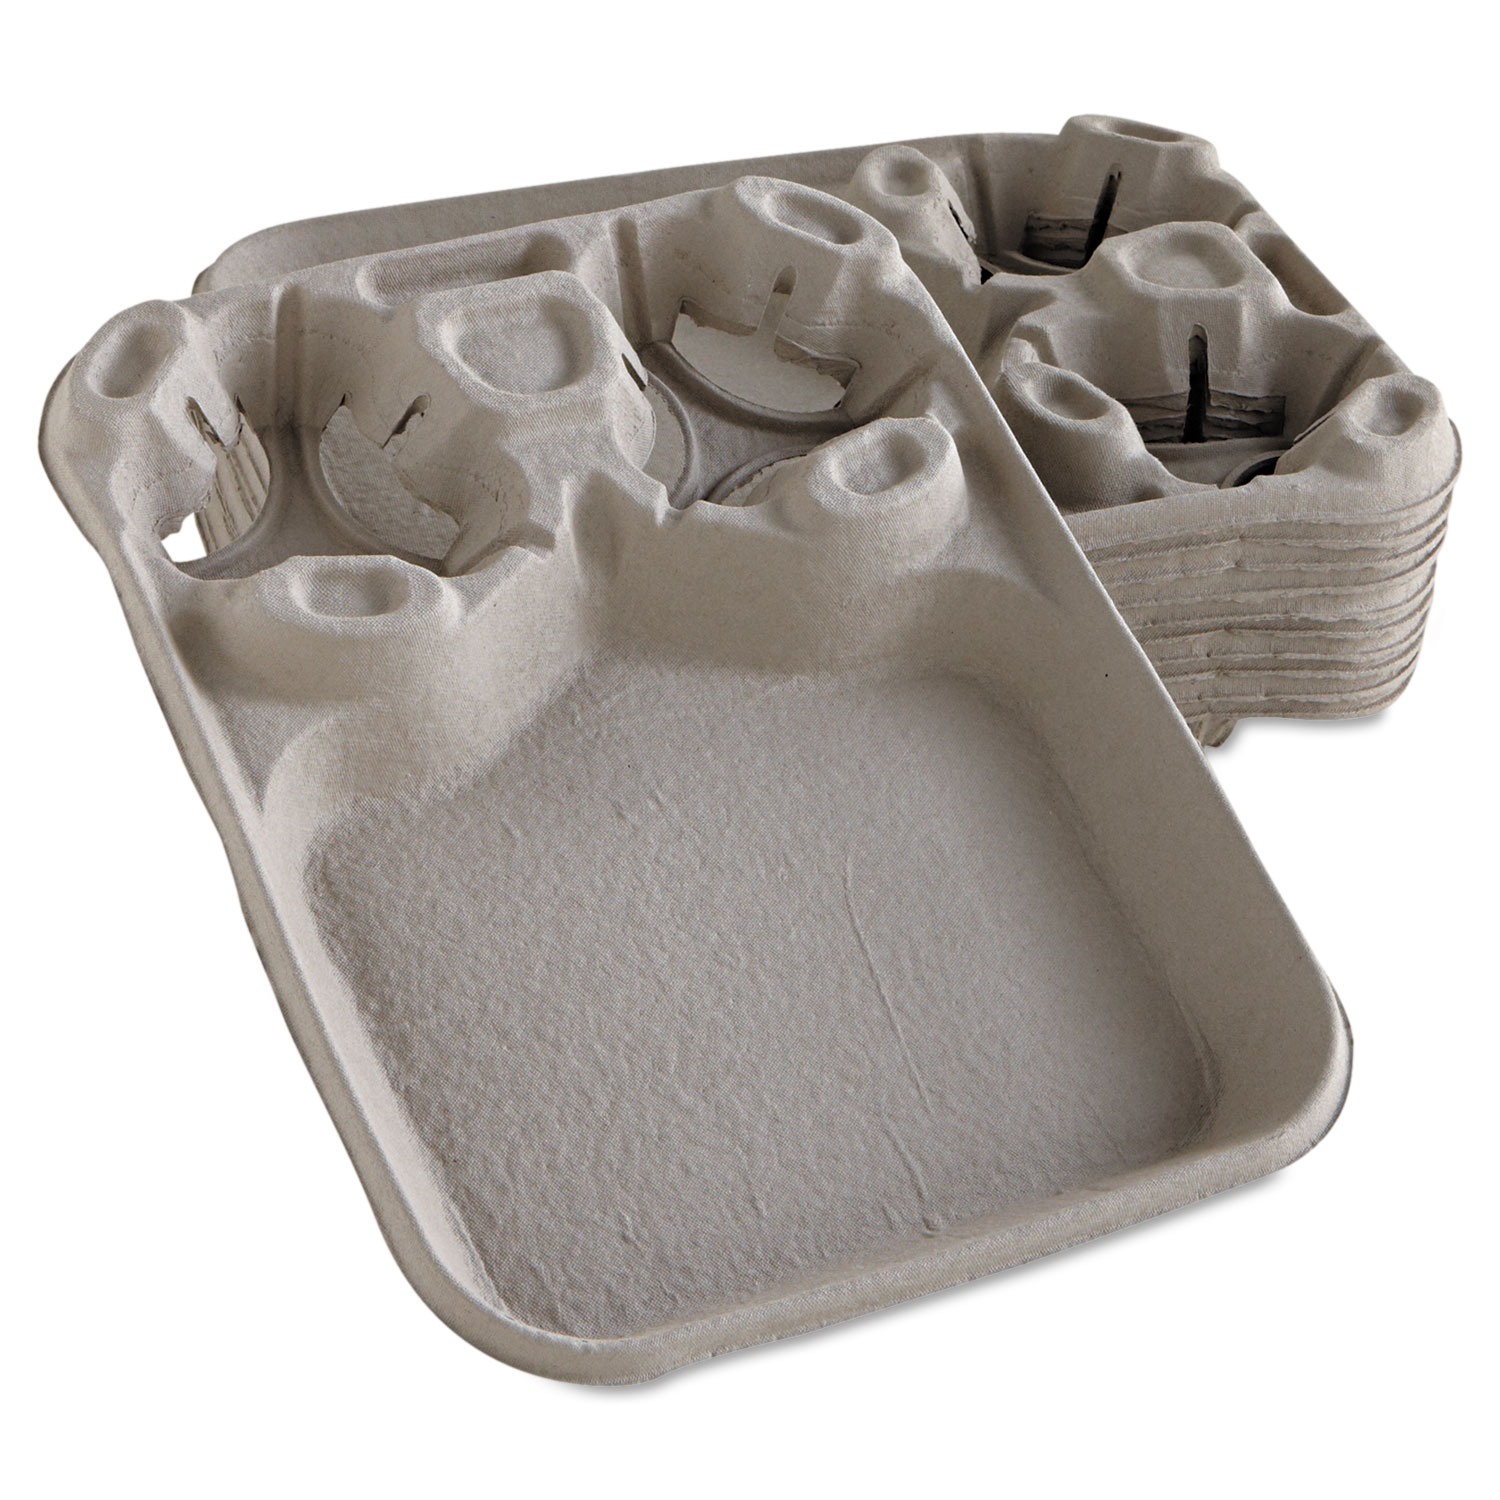 StrongHolder Molded Fiber Cup/Food Trays, 8-44oz, 2-Cup Capacity, 100/Carton